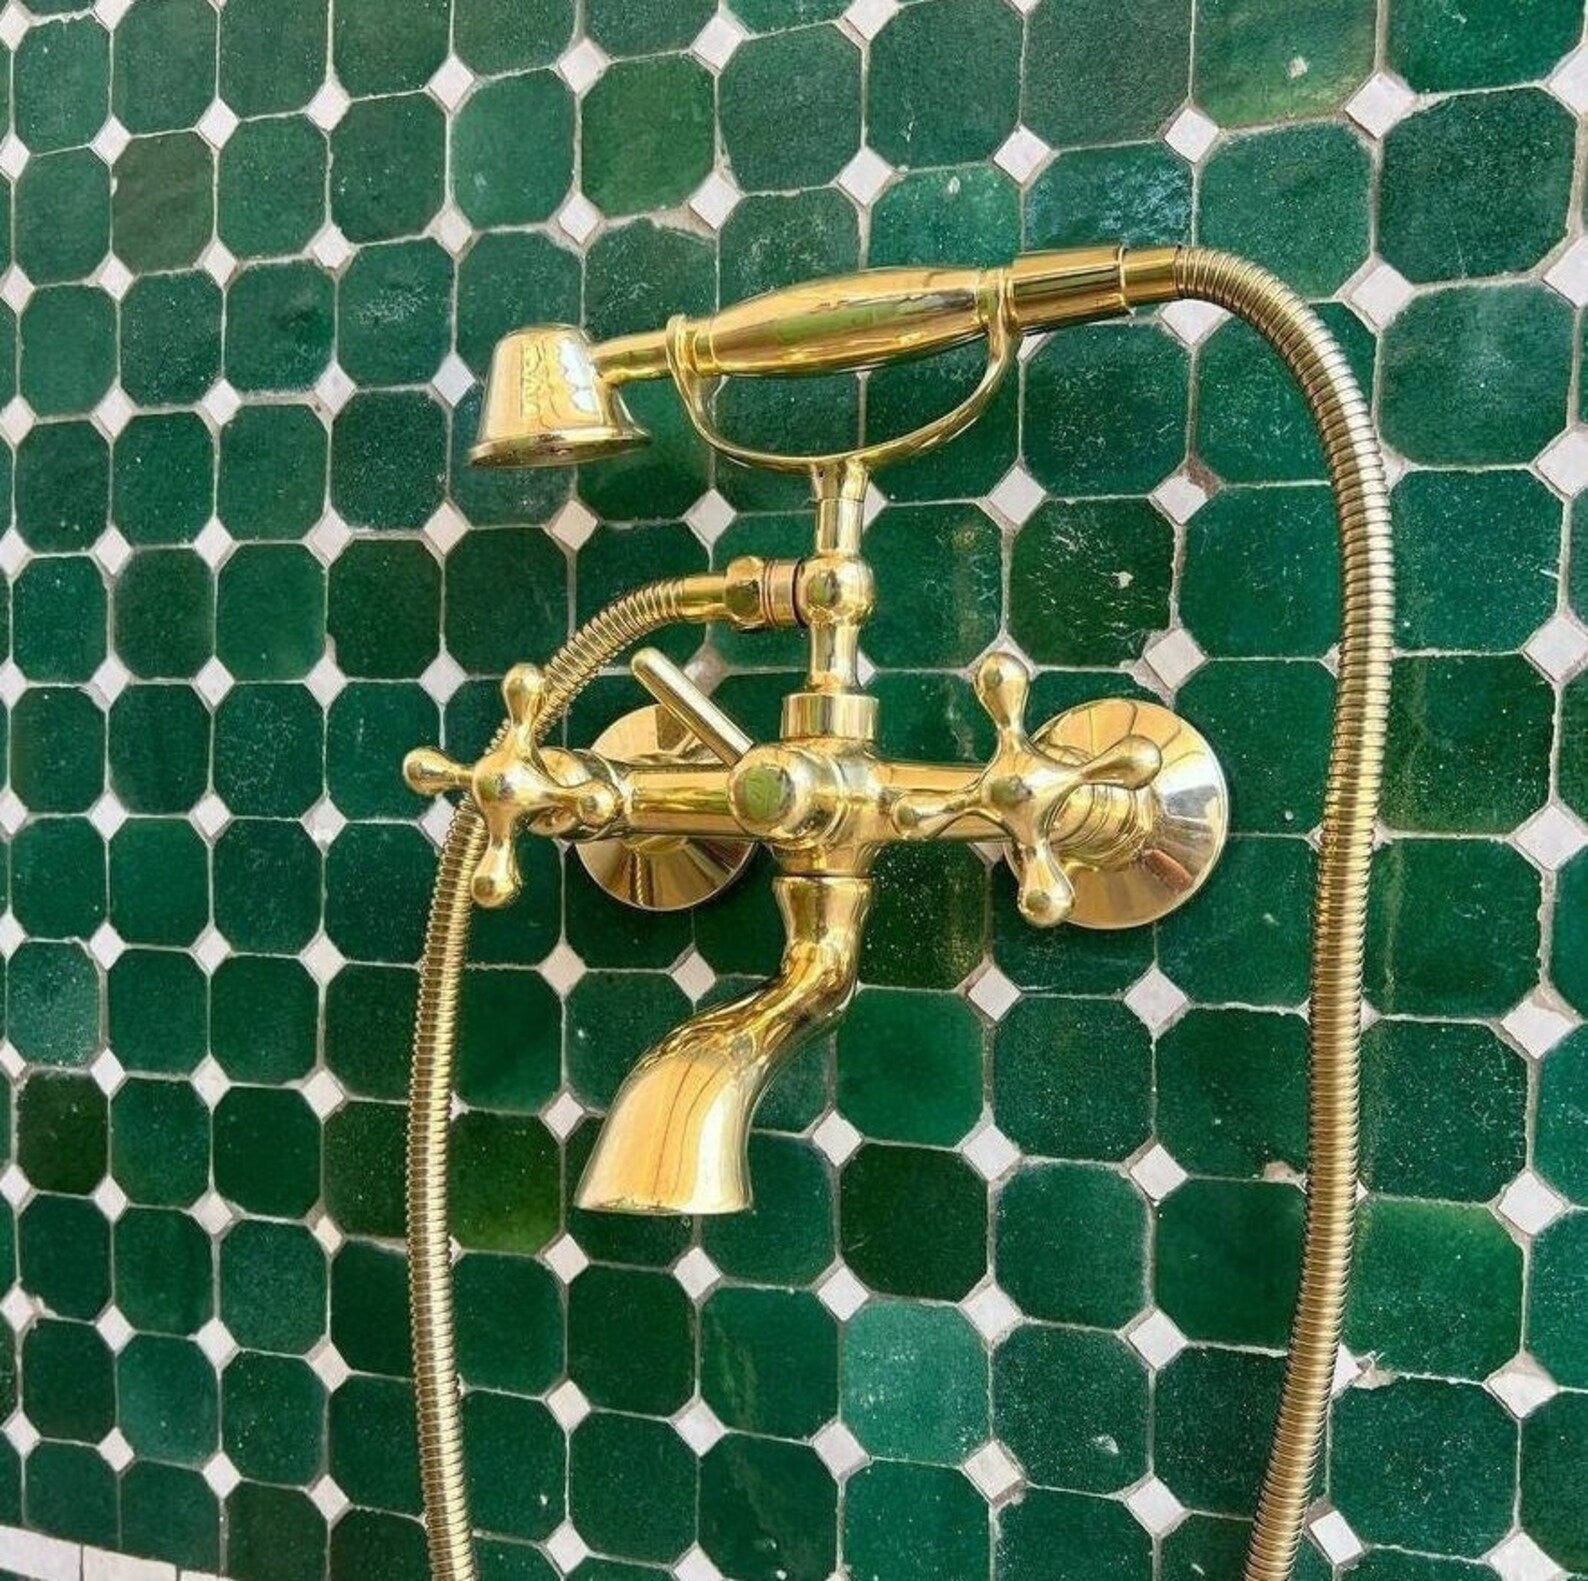 Vintage Clowfoot Tub Wall Mount in Unlacquered Brass - Vintage Tub Filler for bathroom with handshower